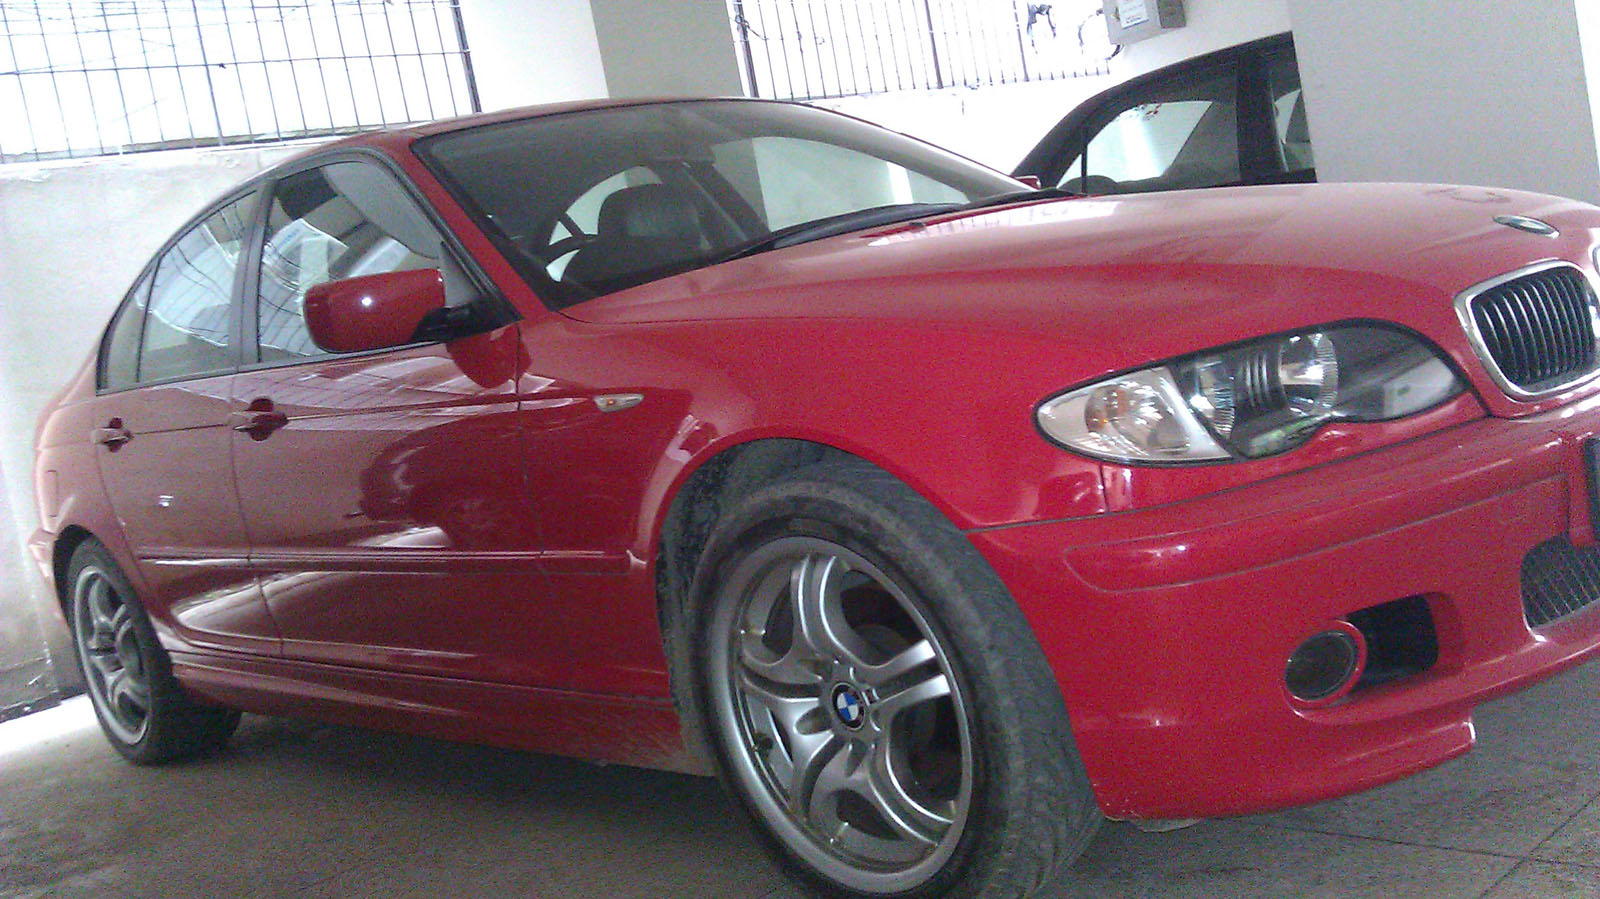 BMW 3 Series Saloon 2004 with M3 Body Kit large image 0